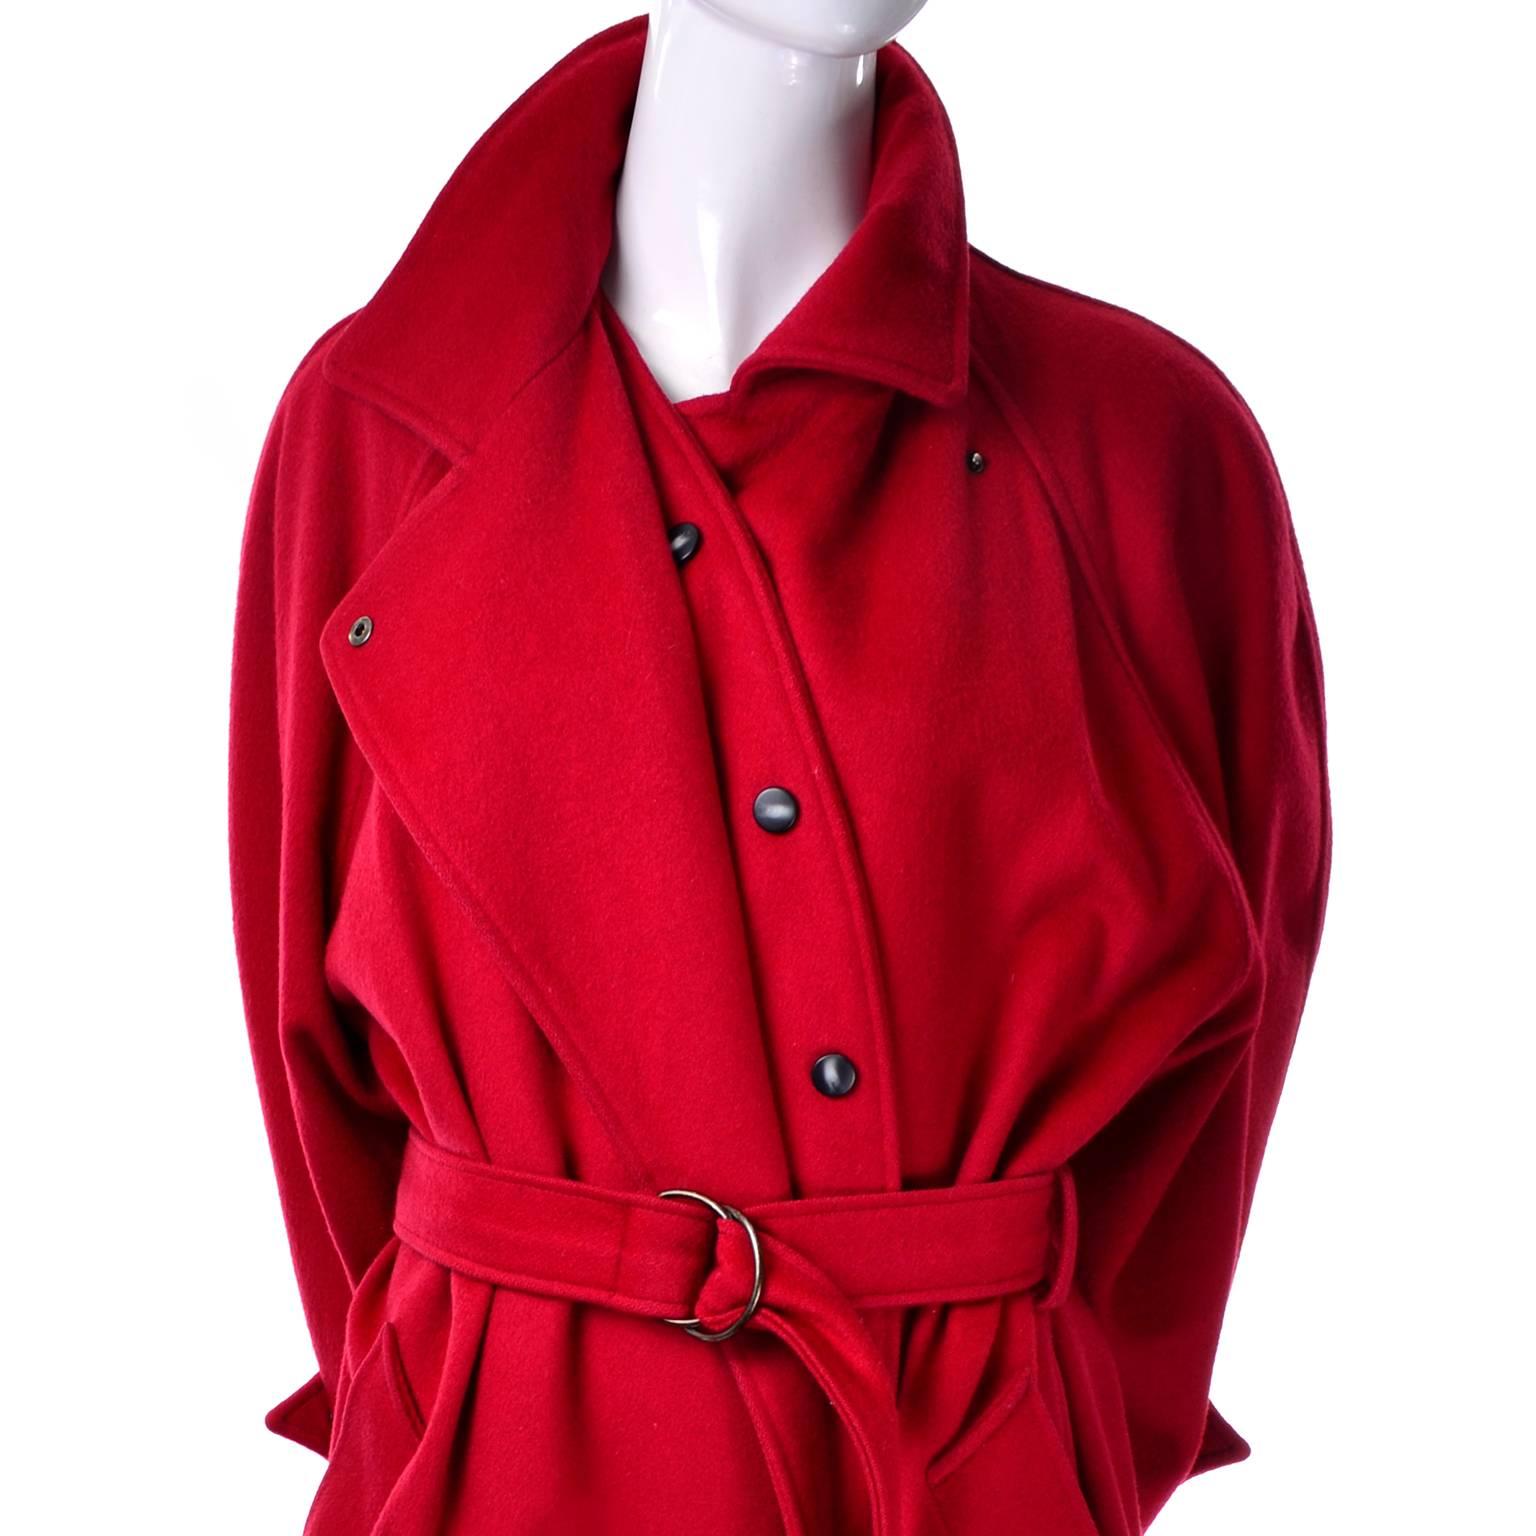 This is a beautiful 100% wool vintage red coat that was designed and made in France in the 1980's for Ramosport .  The coat is labeled a French size 40, which is approximately a US size 8, but since it was meant to be worn oversized, it can be worn